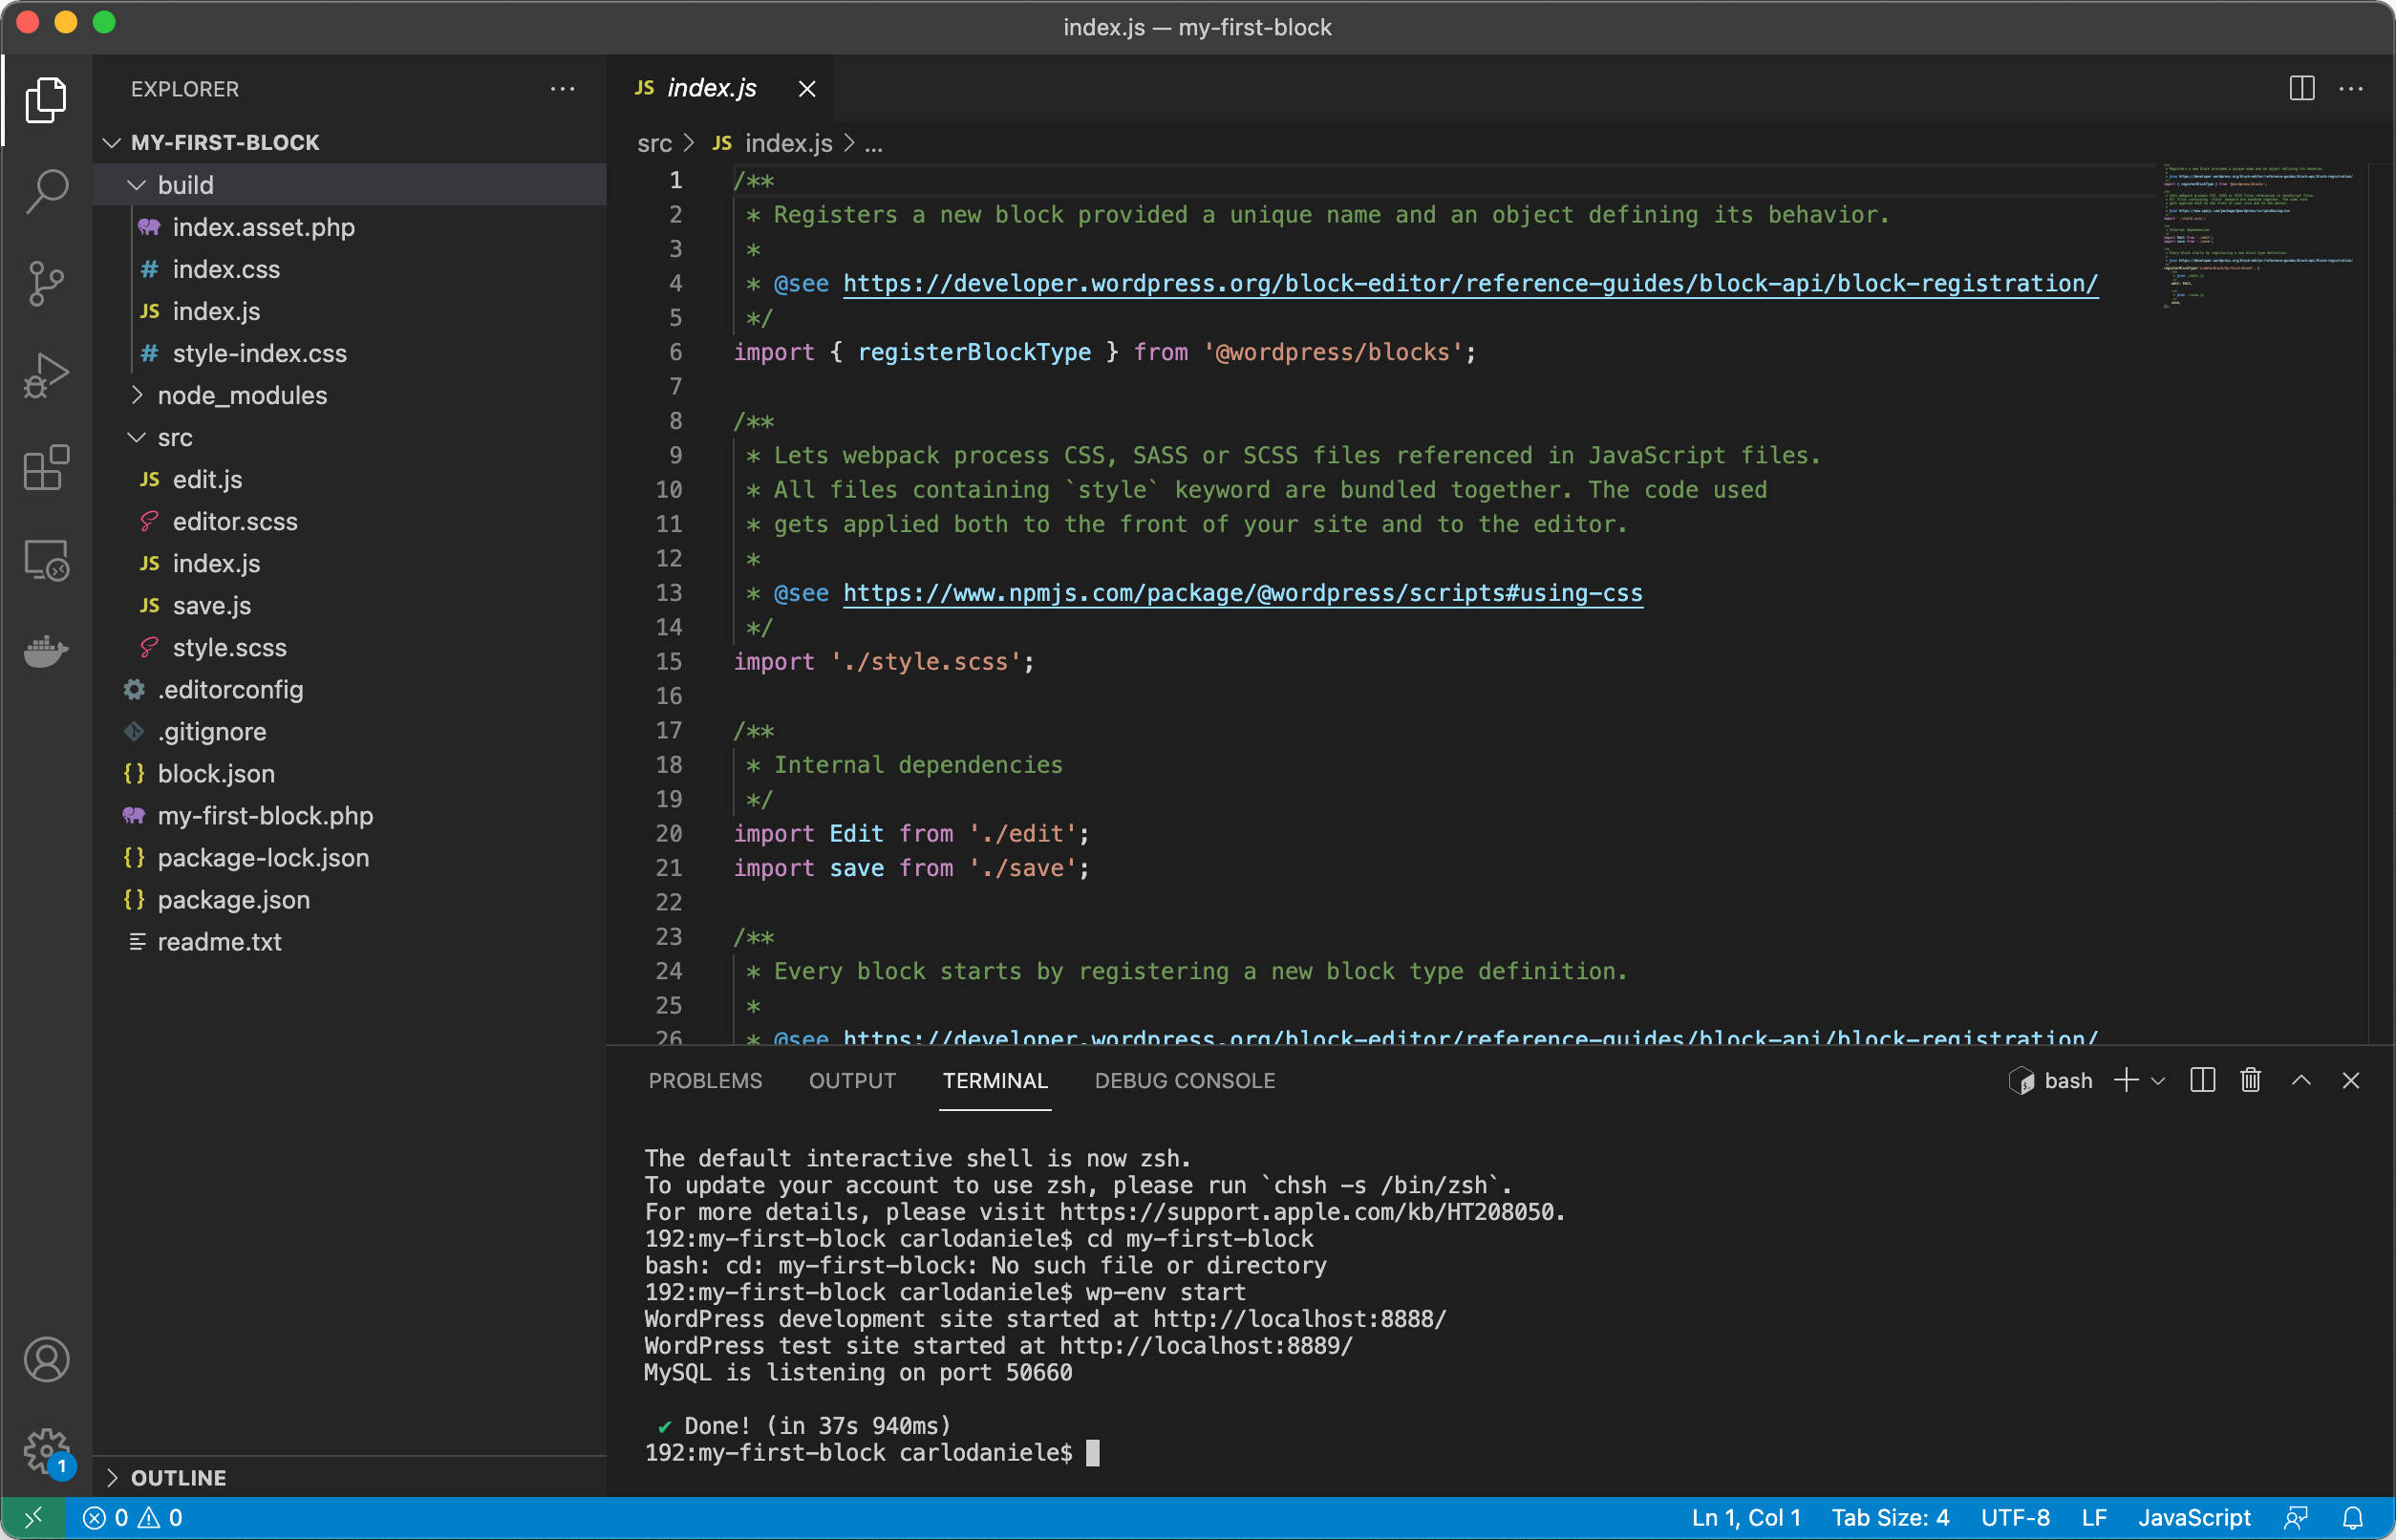 Running commands from Visual Studio Code Terminal.